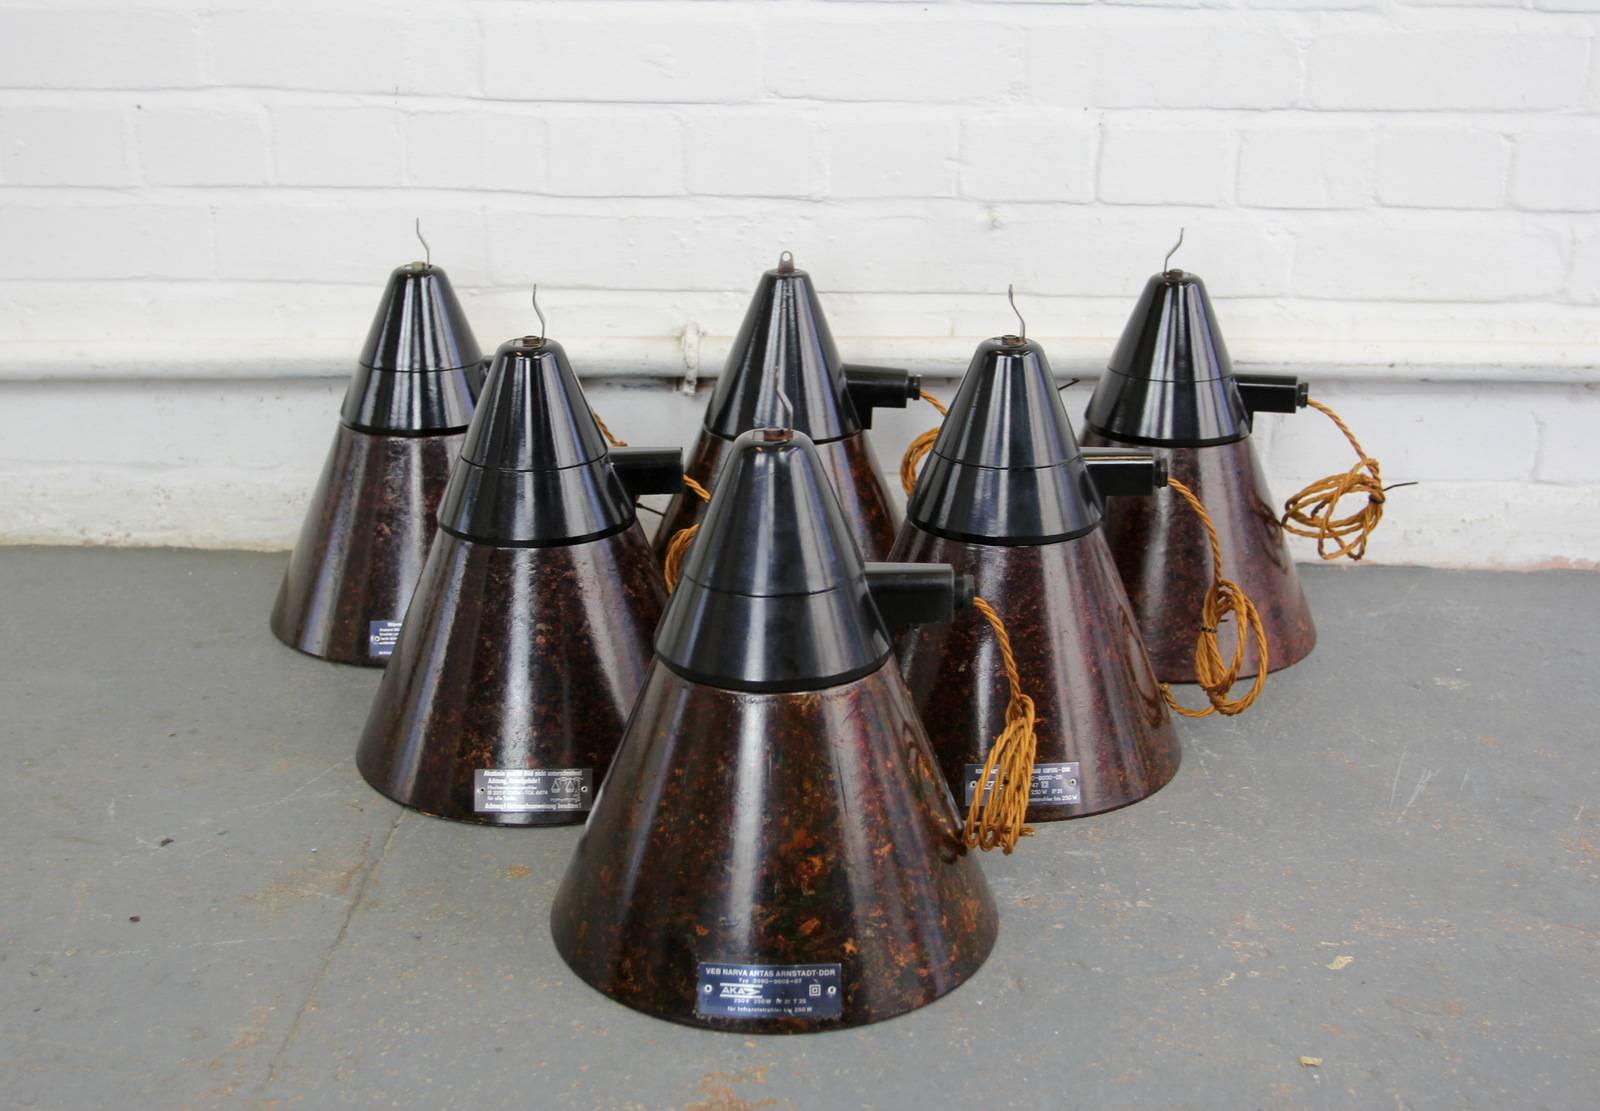 East German bakelite conical factory lights, circa 1950s

Product code #OA476

- Price is per light (12 available)
- Mottled bakelite shade 
- Black bakelite tops
- Takes E27 fitting bulbs
- Comes with 100cm of braided cable
- Comes with